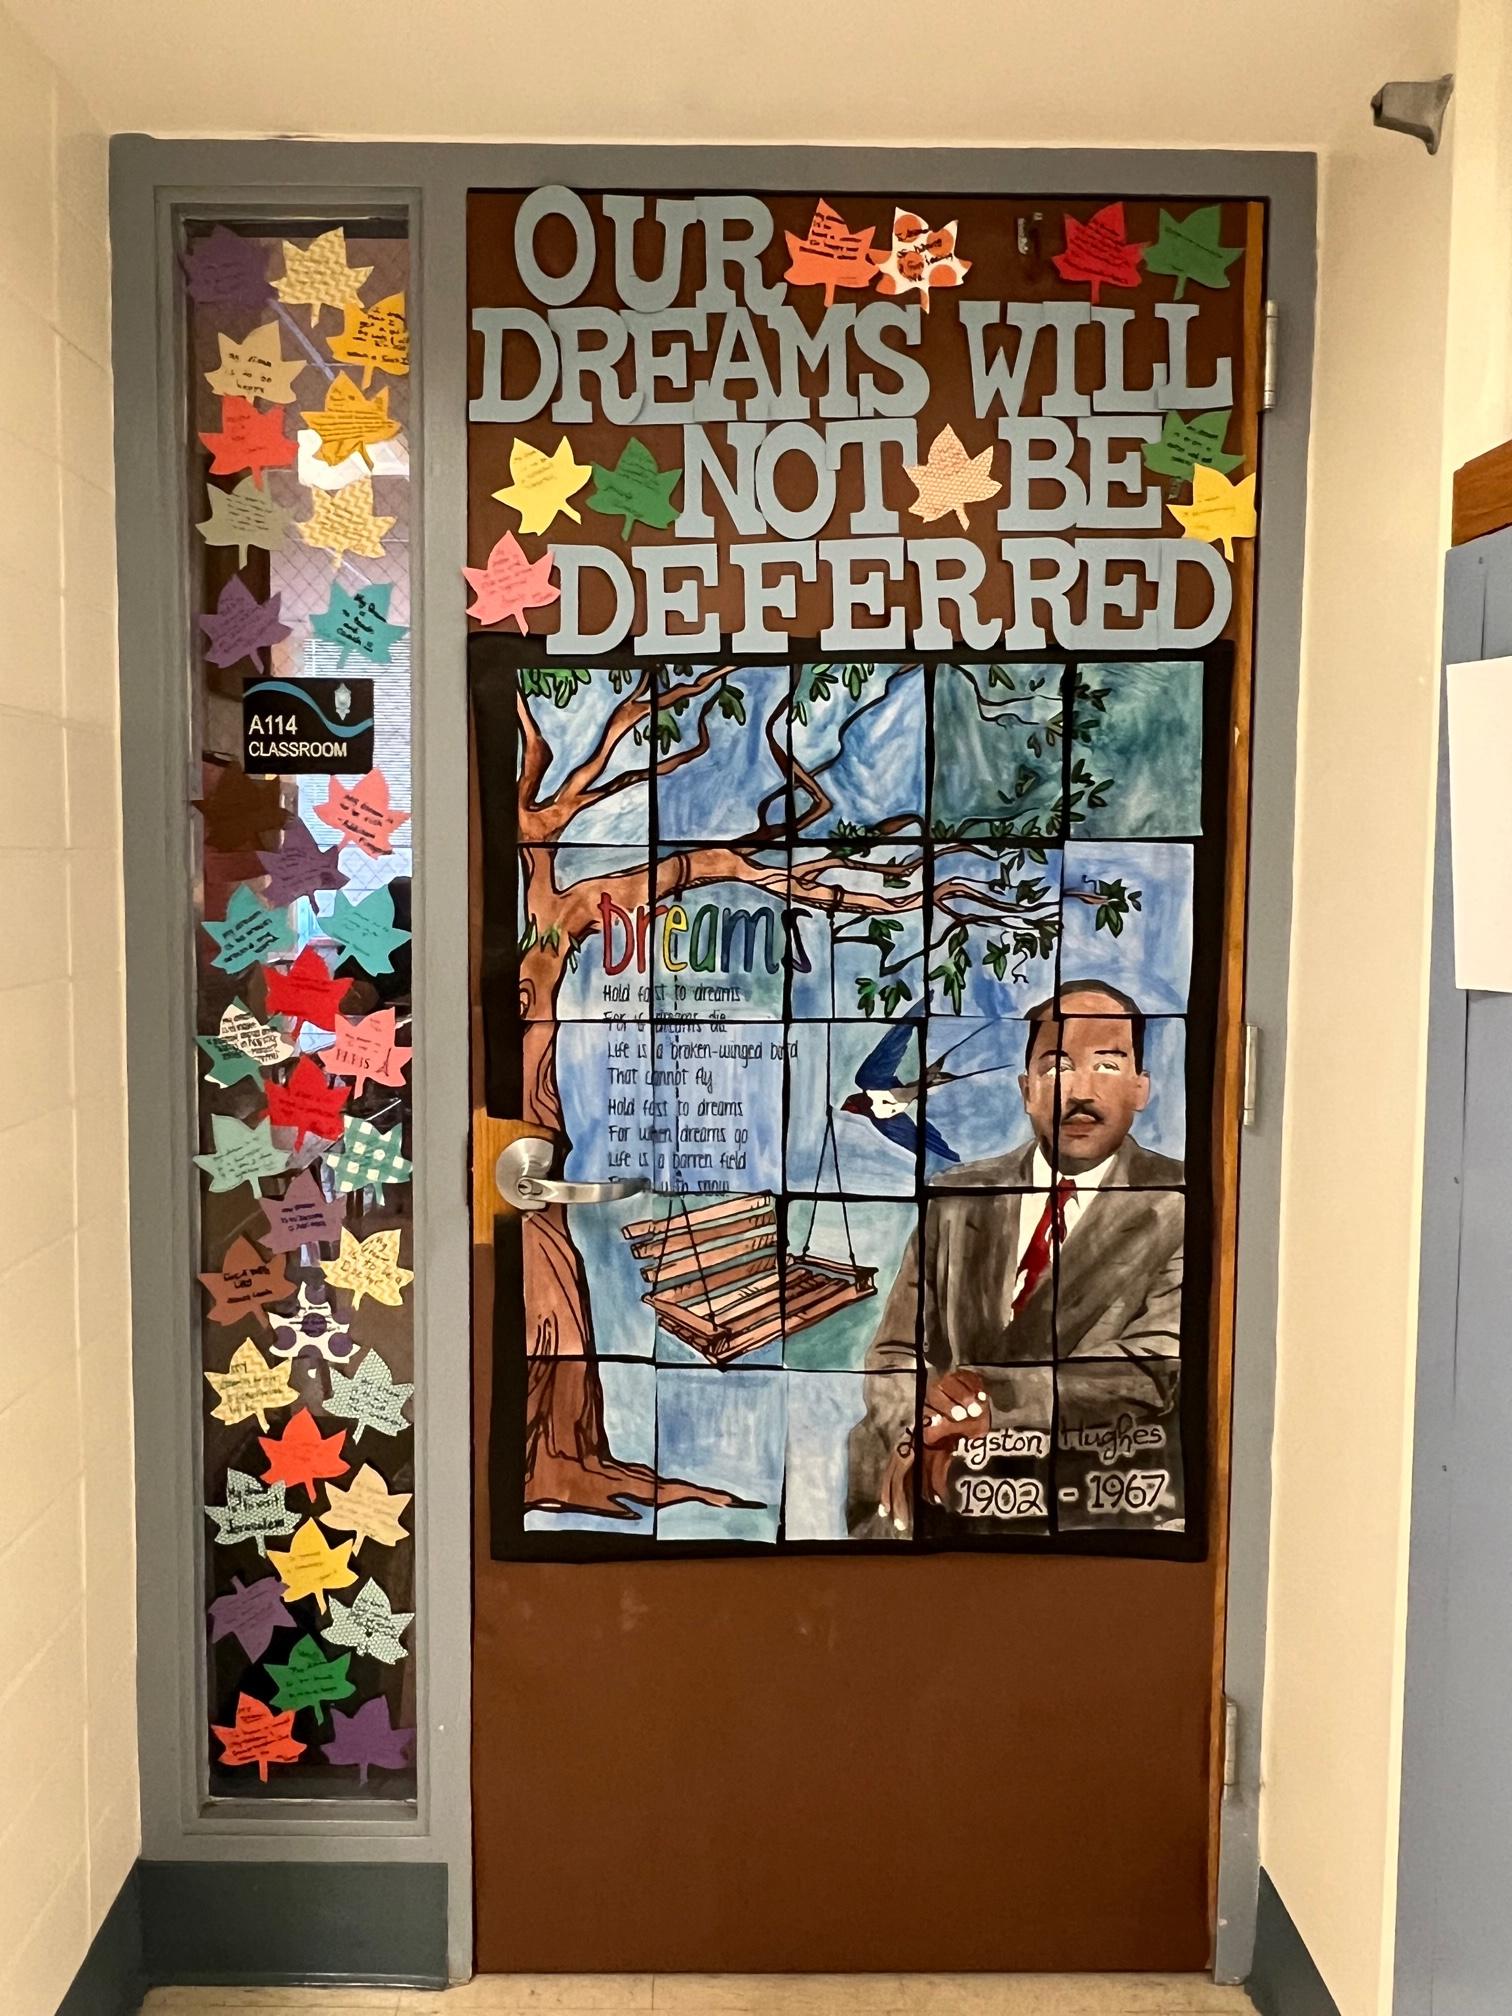 Willowbrook Black Organization for Student Success (BOSS) hosts door decorating contest to recognize and celebrate Black History Month